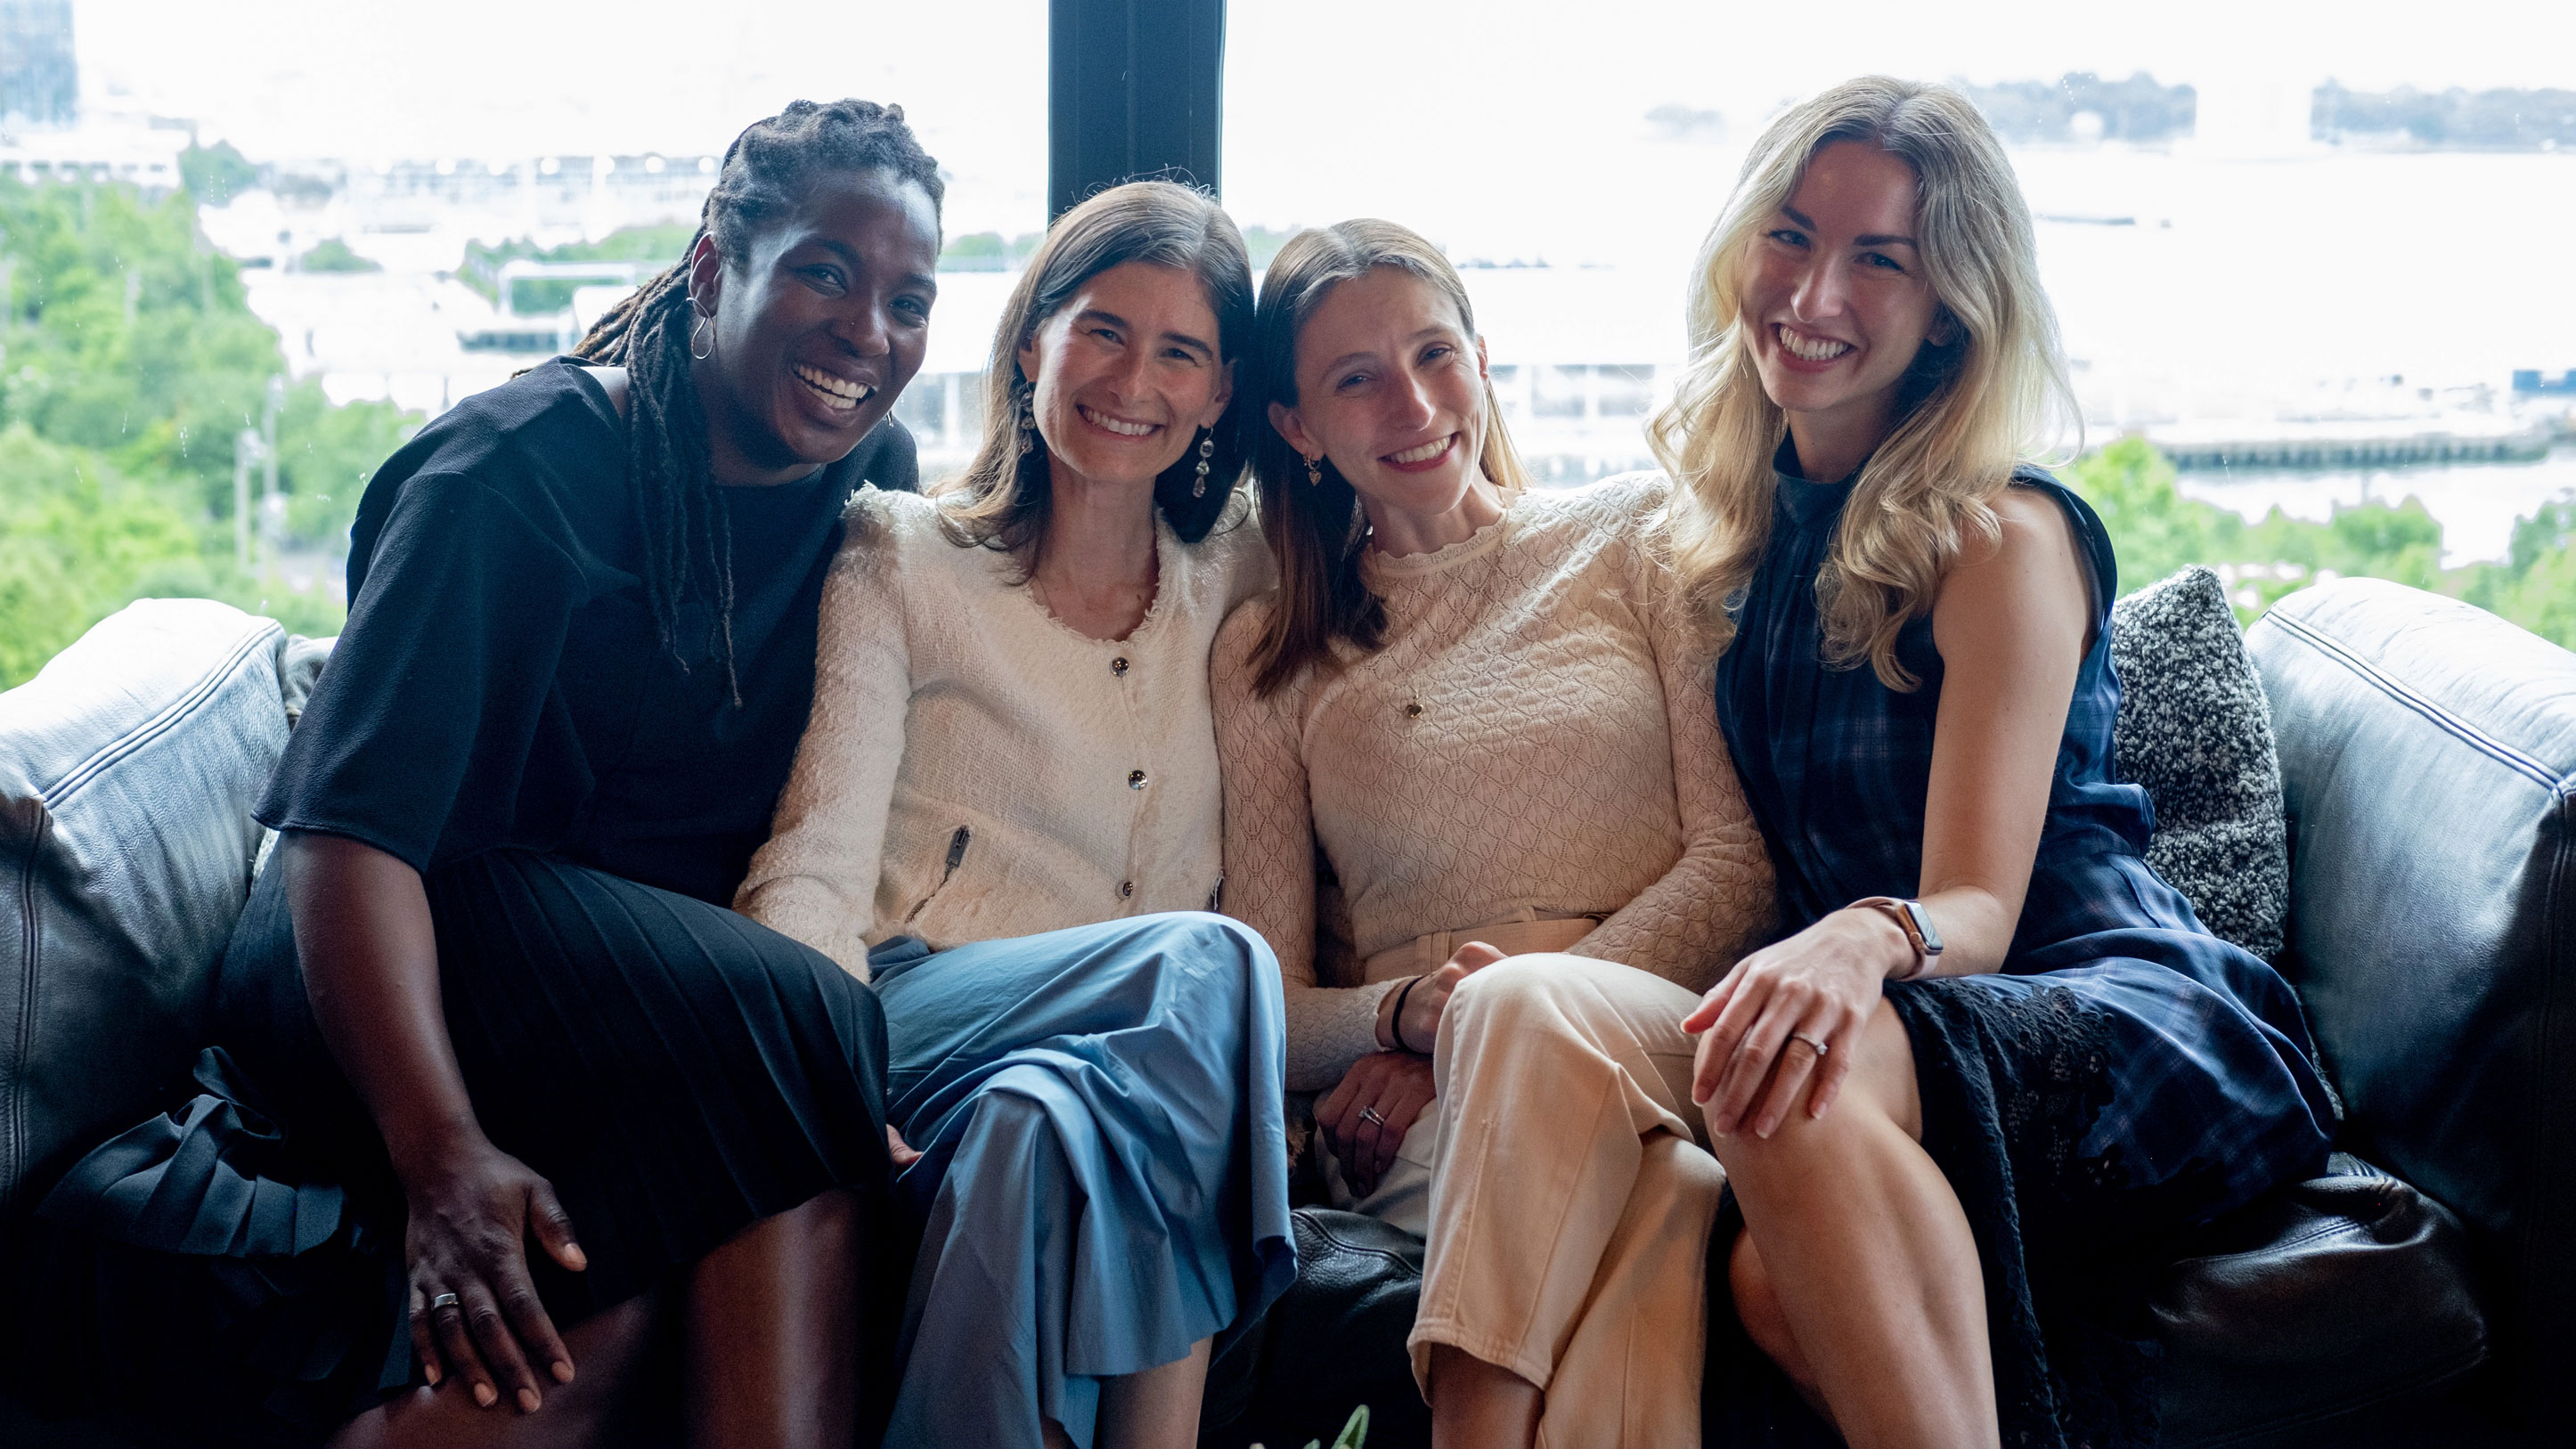 Coalition investors (left to right): Cityblock Health co-founder Toyin Ajayi, Tribe AI co-founder Jackie Nelson, Umbrella co-founder Lindsay Ullman, Glossier VP of Communications Ashley Mayer